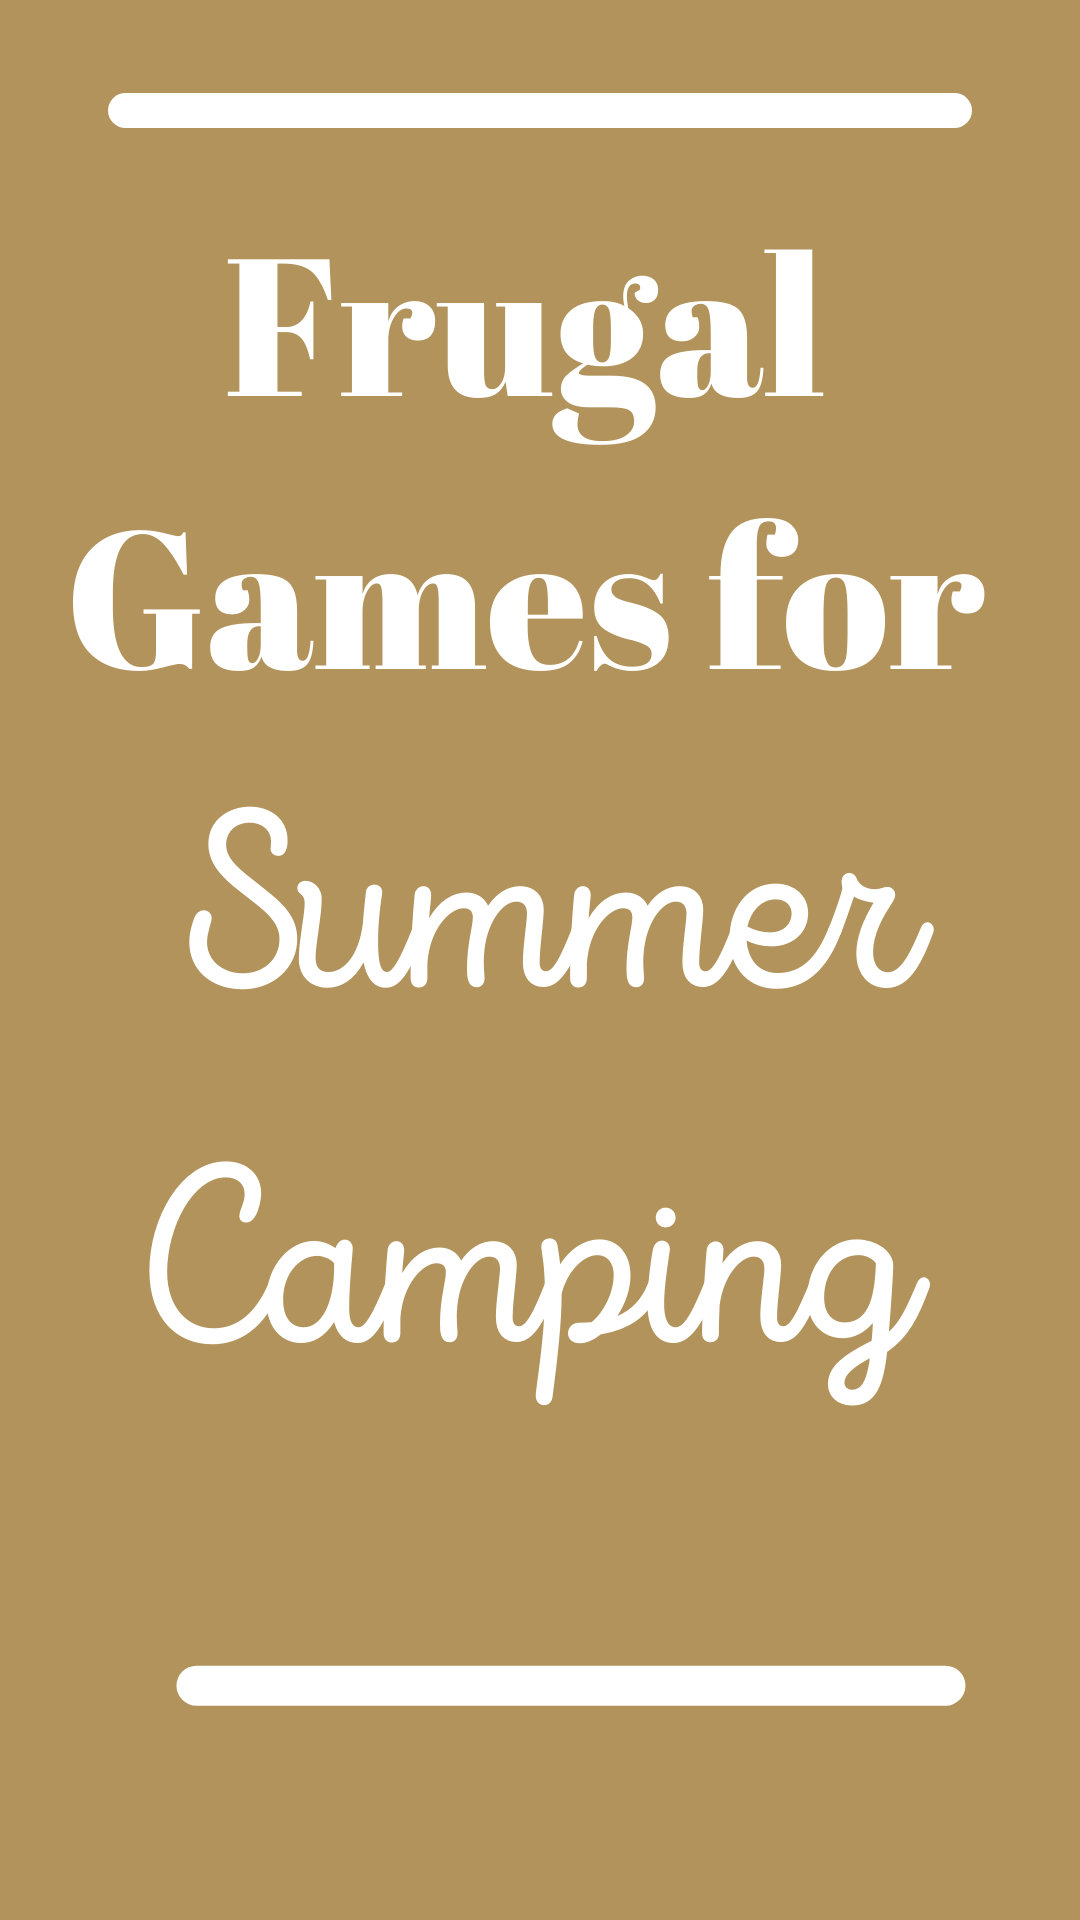 Frugal Games for Summer Camping